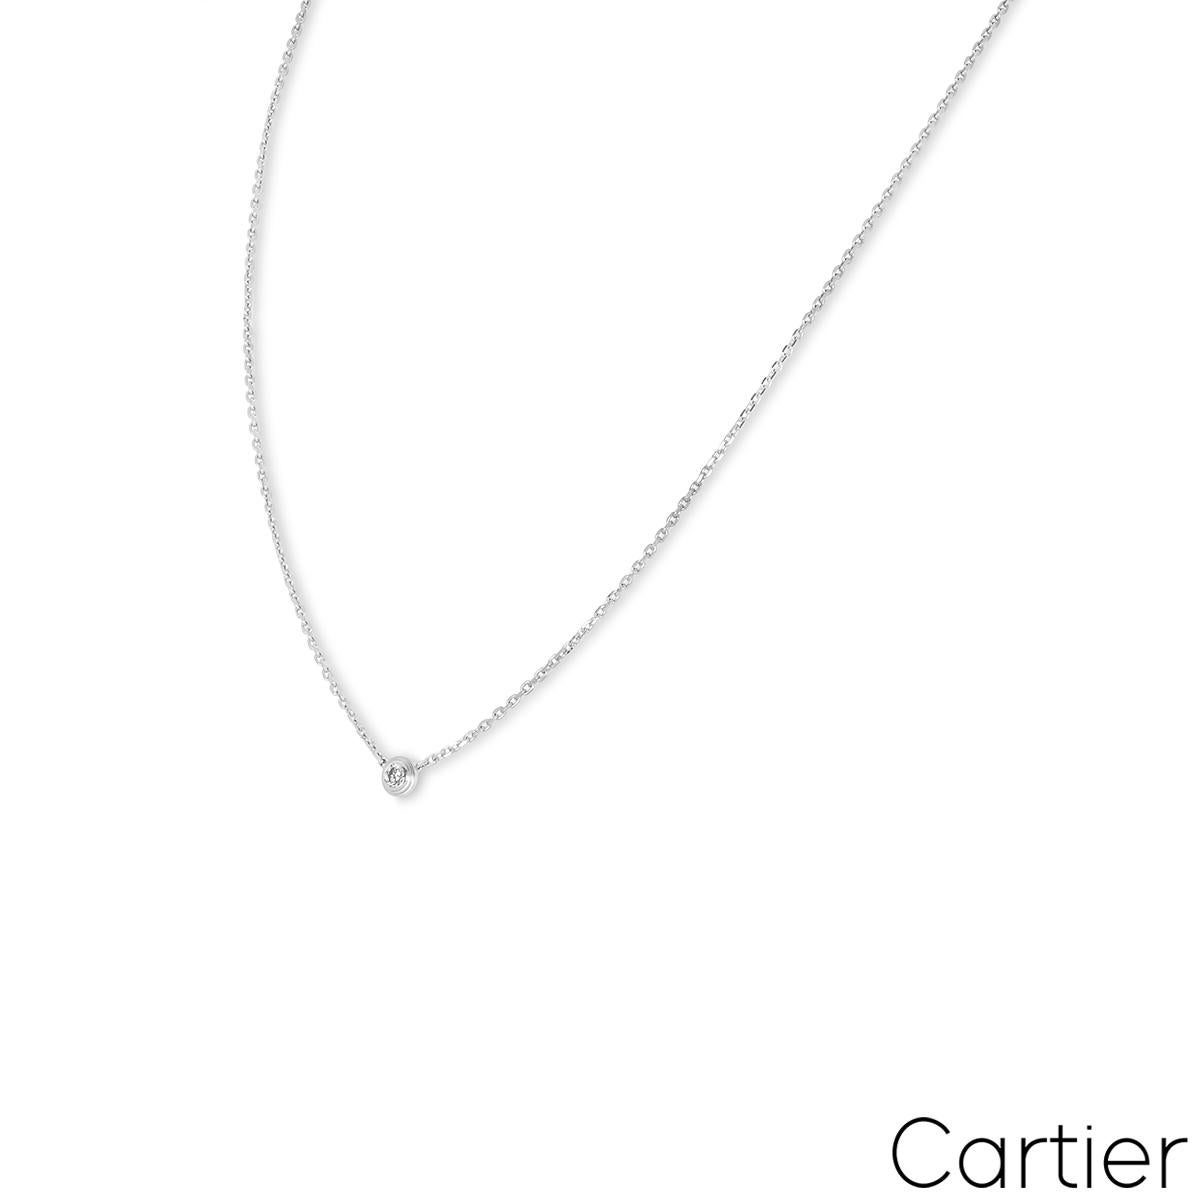 A charming 18k white gold diamond pendant by Cartier from the D'Amour collection. The necklace is adorned with a single round brilliant cut diamond in a bezel setting weighing approximately 0.04ct, F colour and VS clarity. The adjustable XS necklace